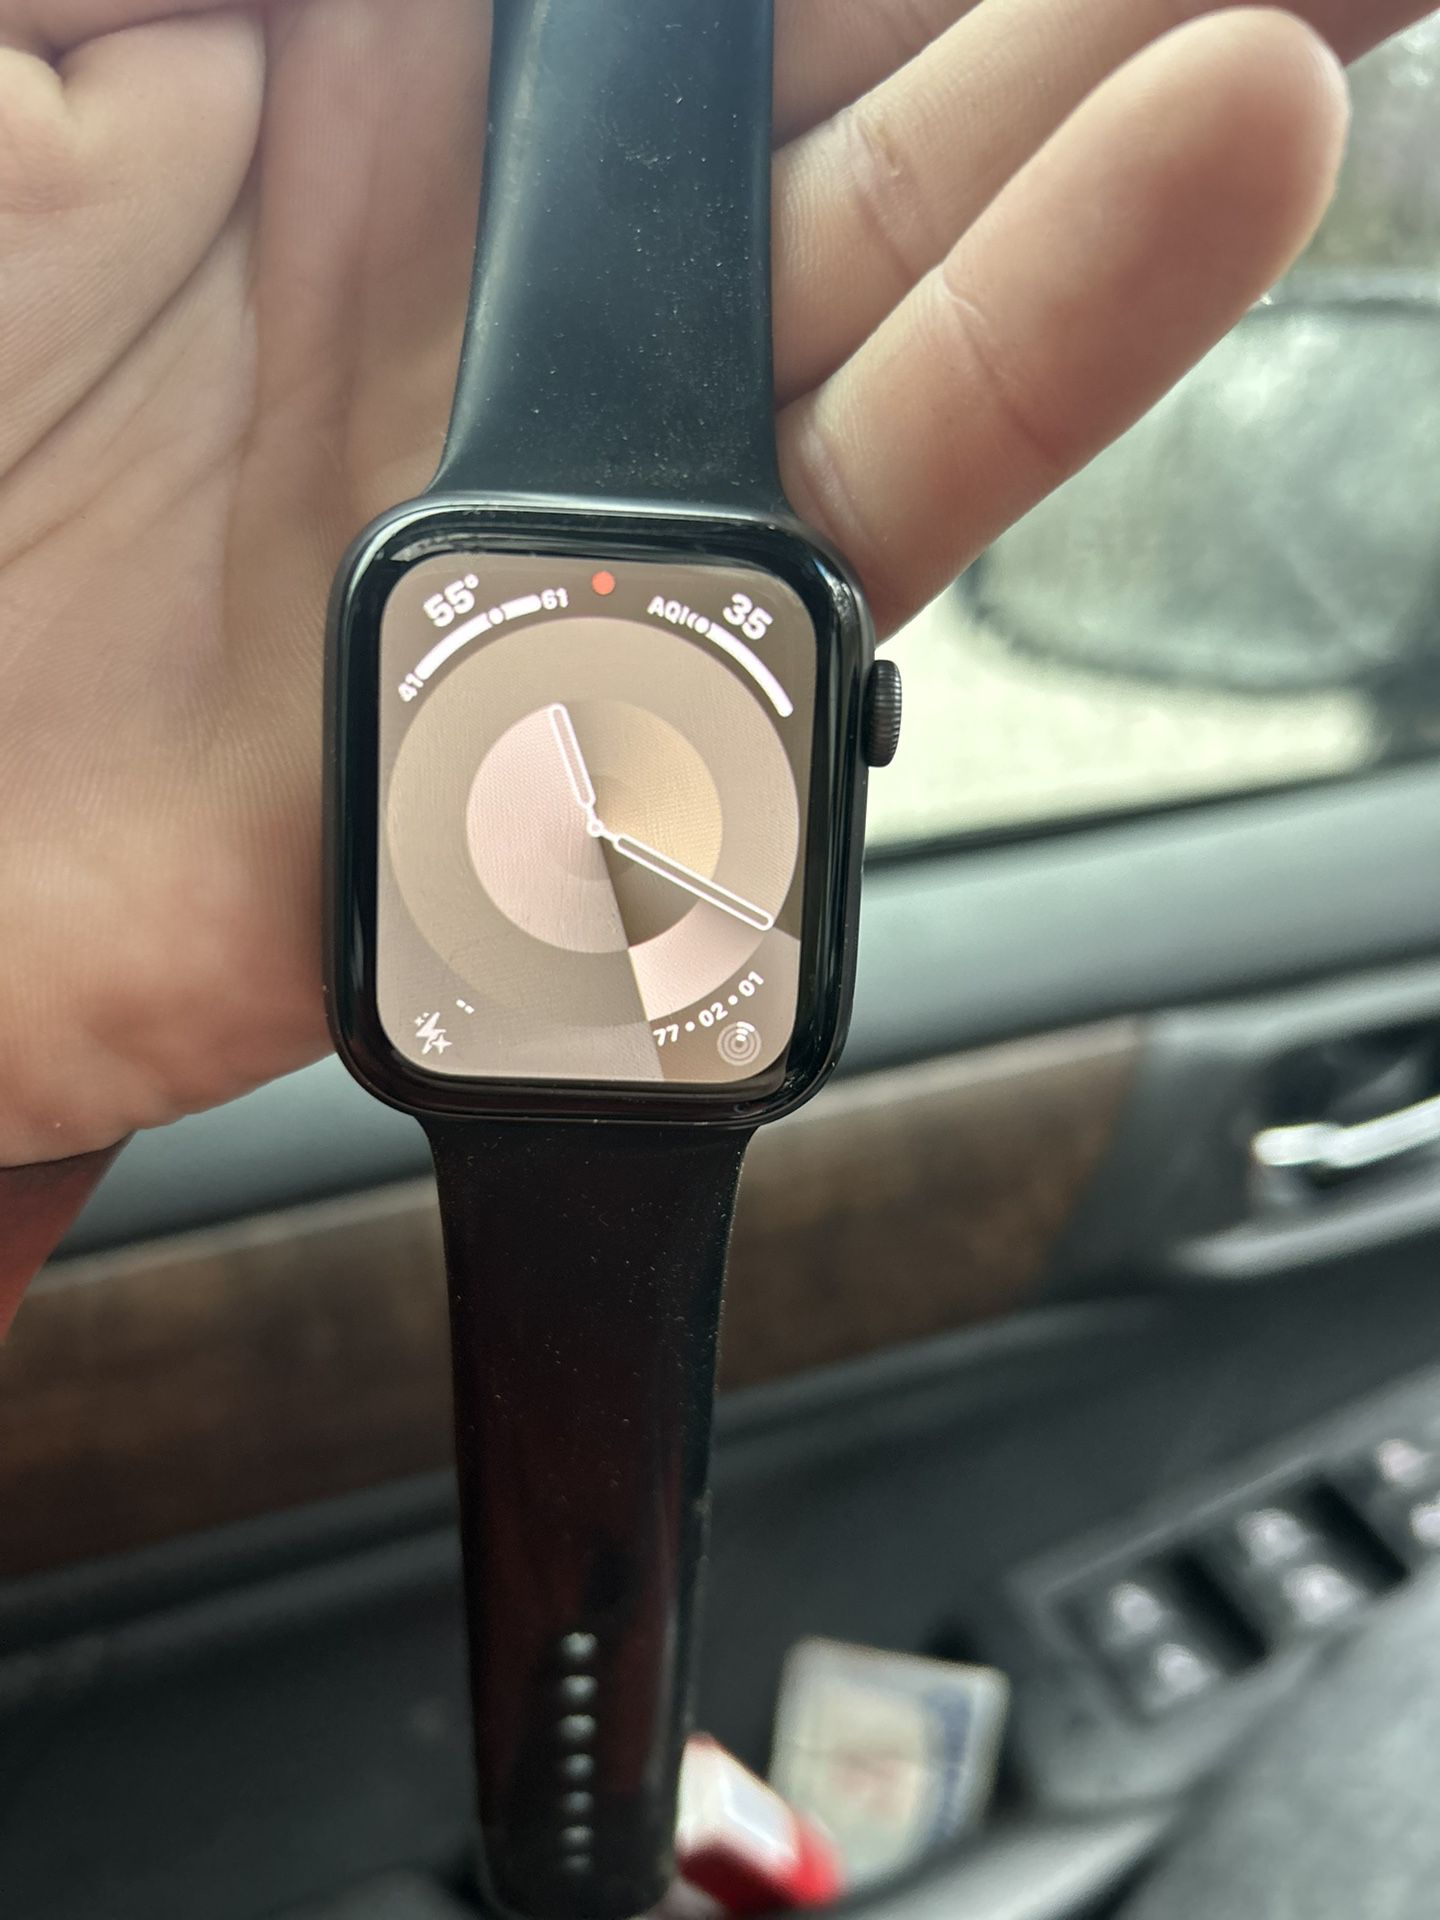 Series 6 44mm Unlocked Apple Watch - With Mag Charge Stand